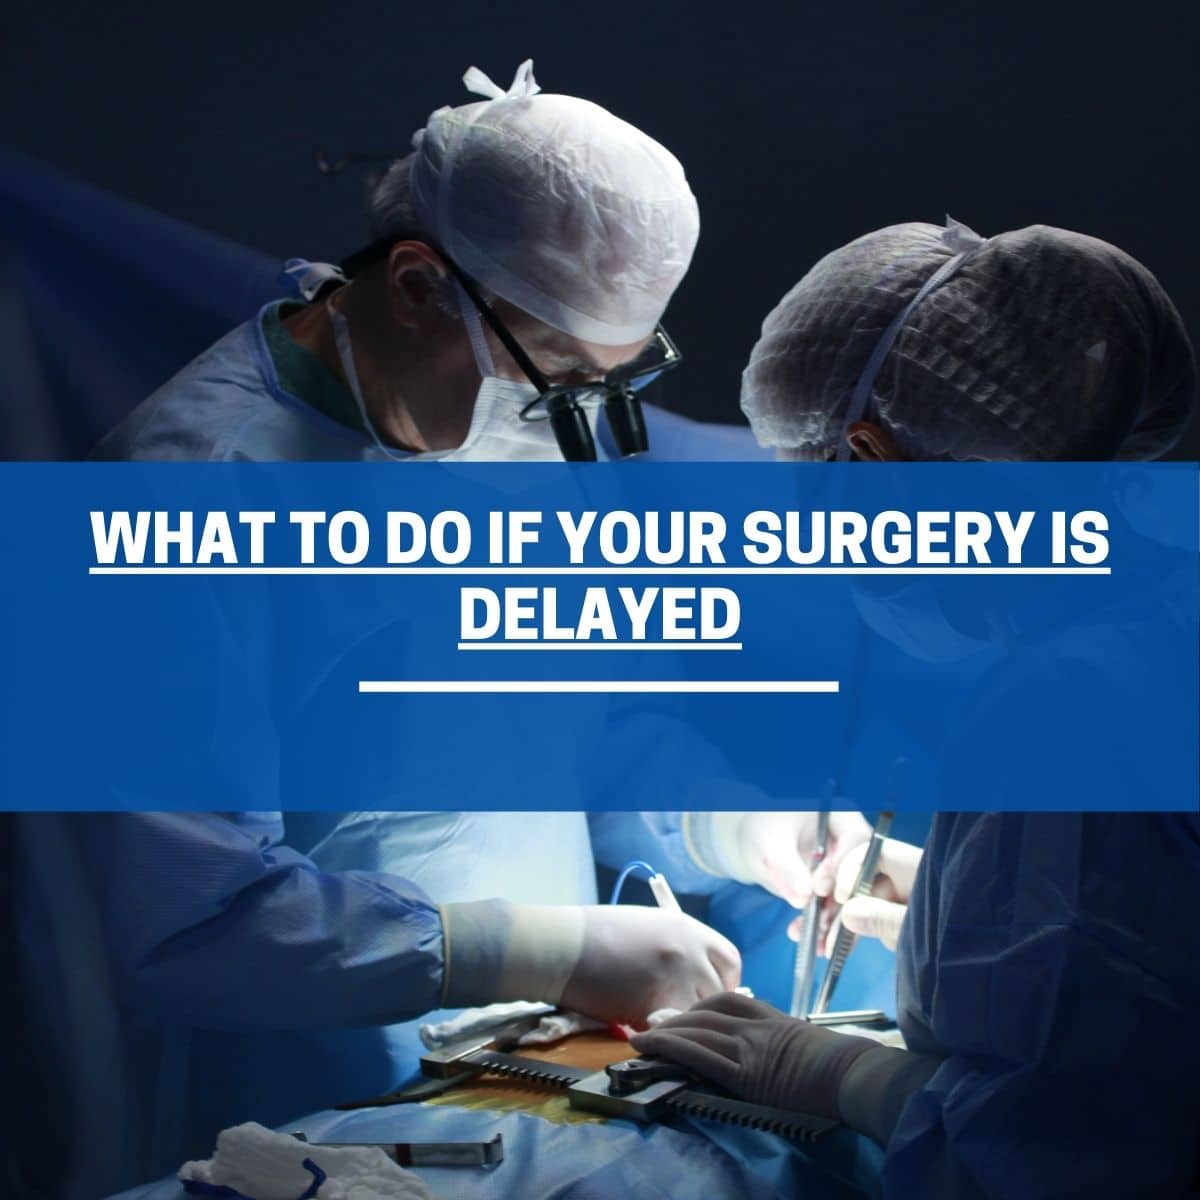 What to Do If Your Surgery is Delayed